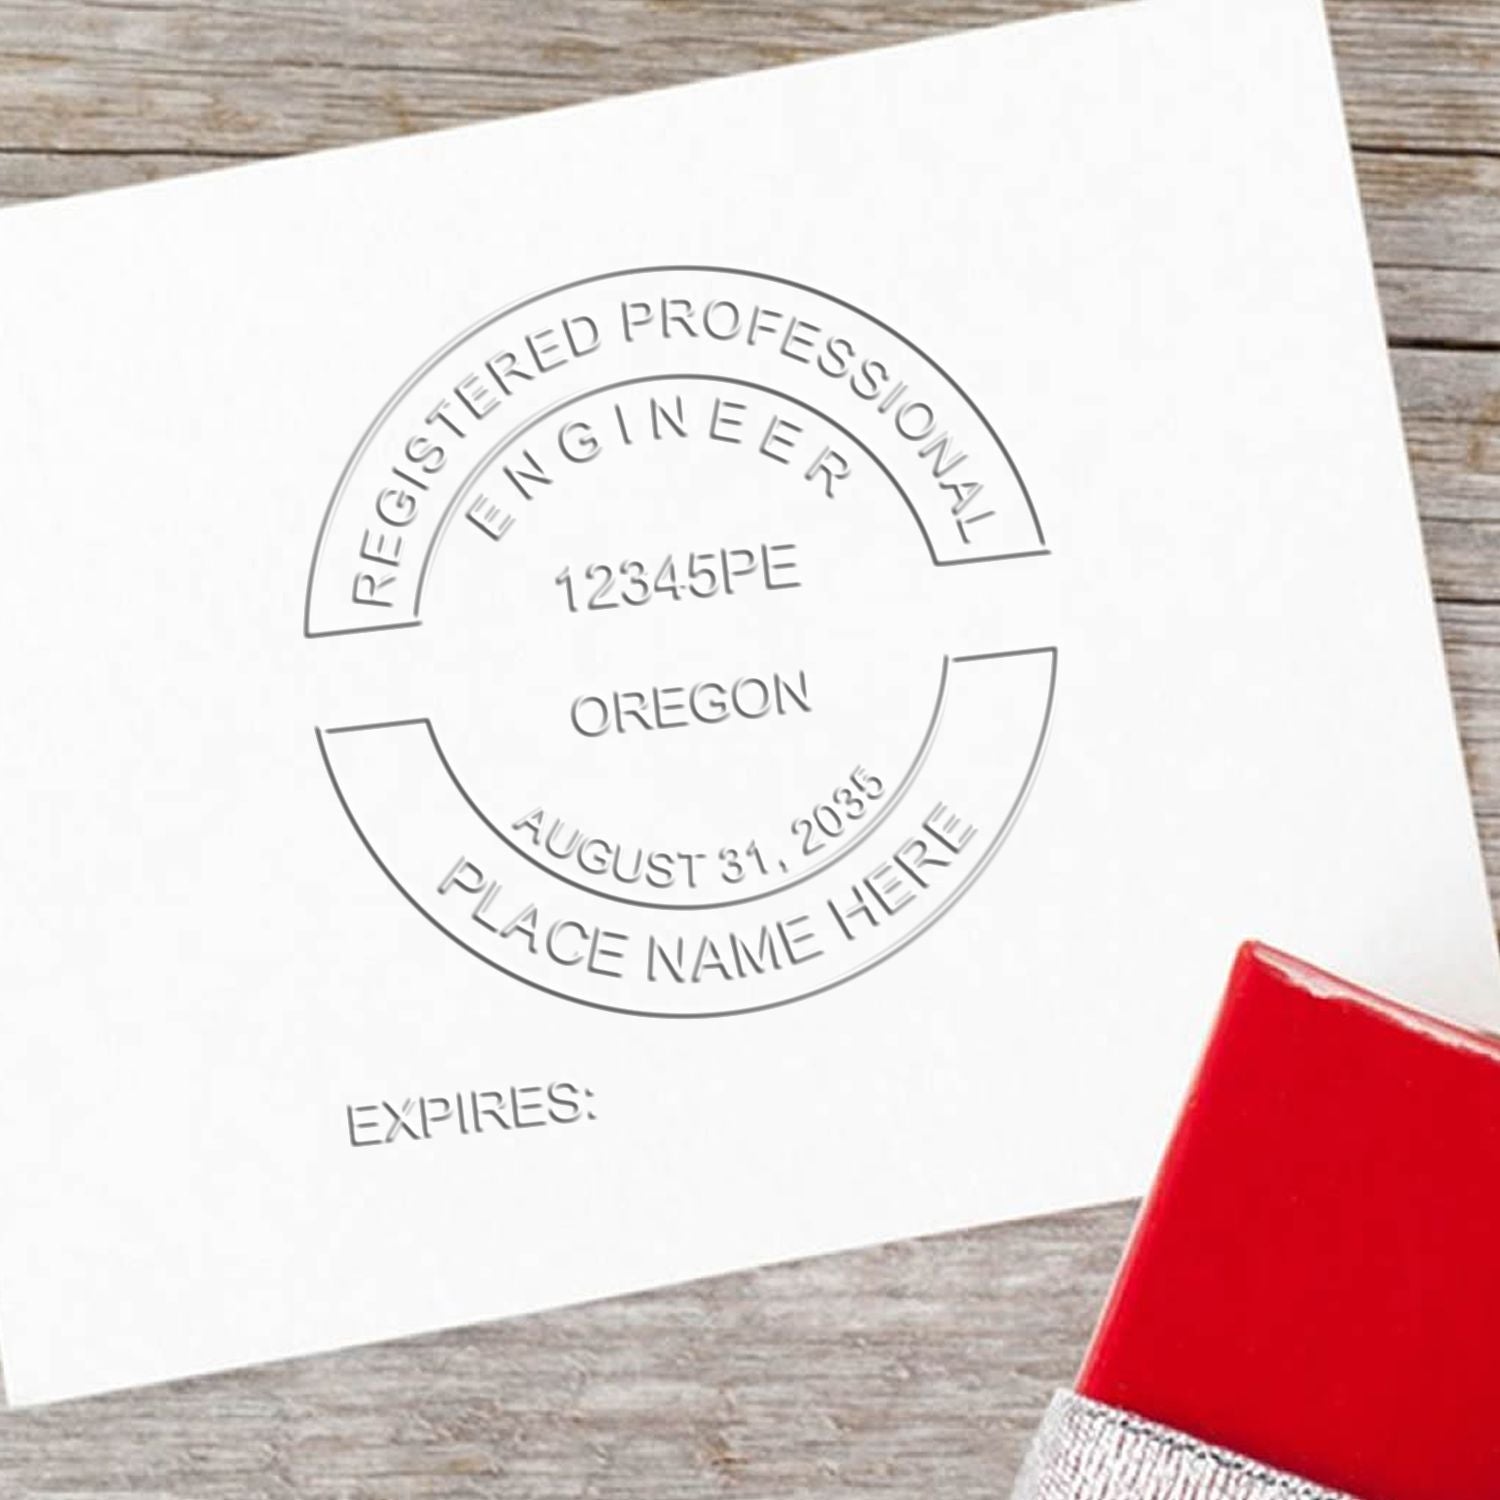 A stamped impression of the Handheld Oregon Professional Engineer Embosser in this stylish lifestyle photo, setting the tone for a unique and personalized product.